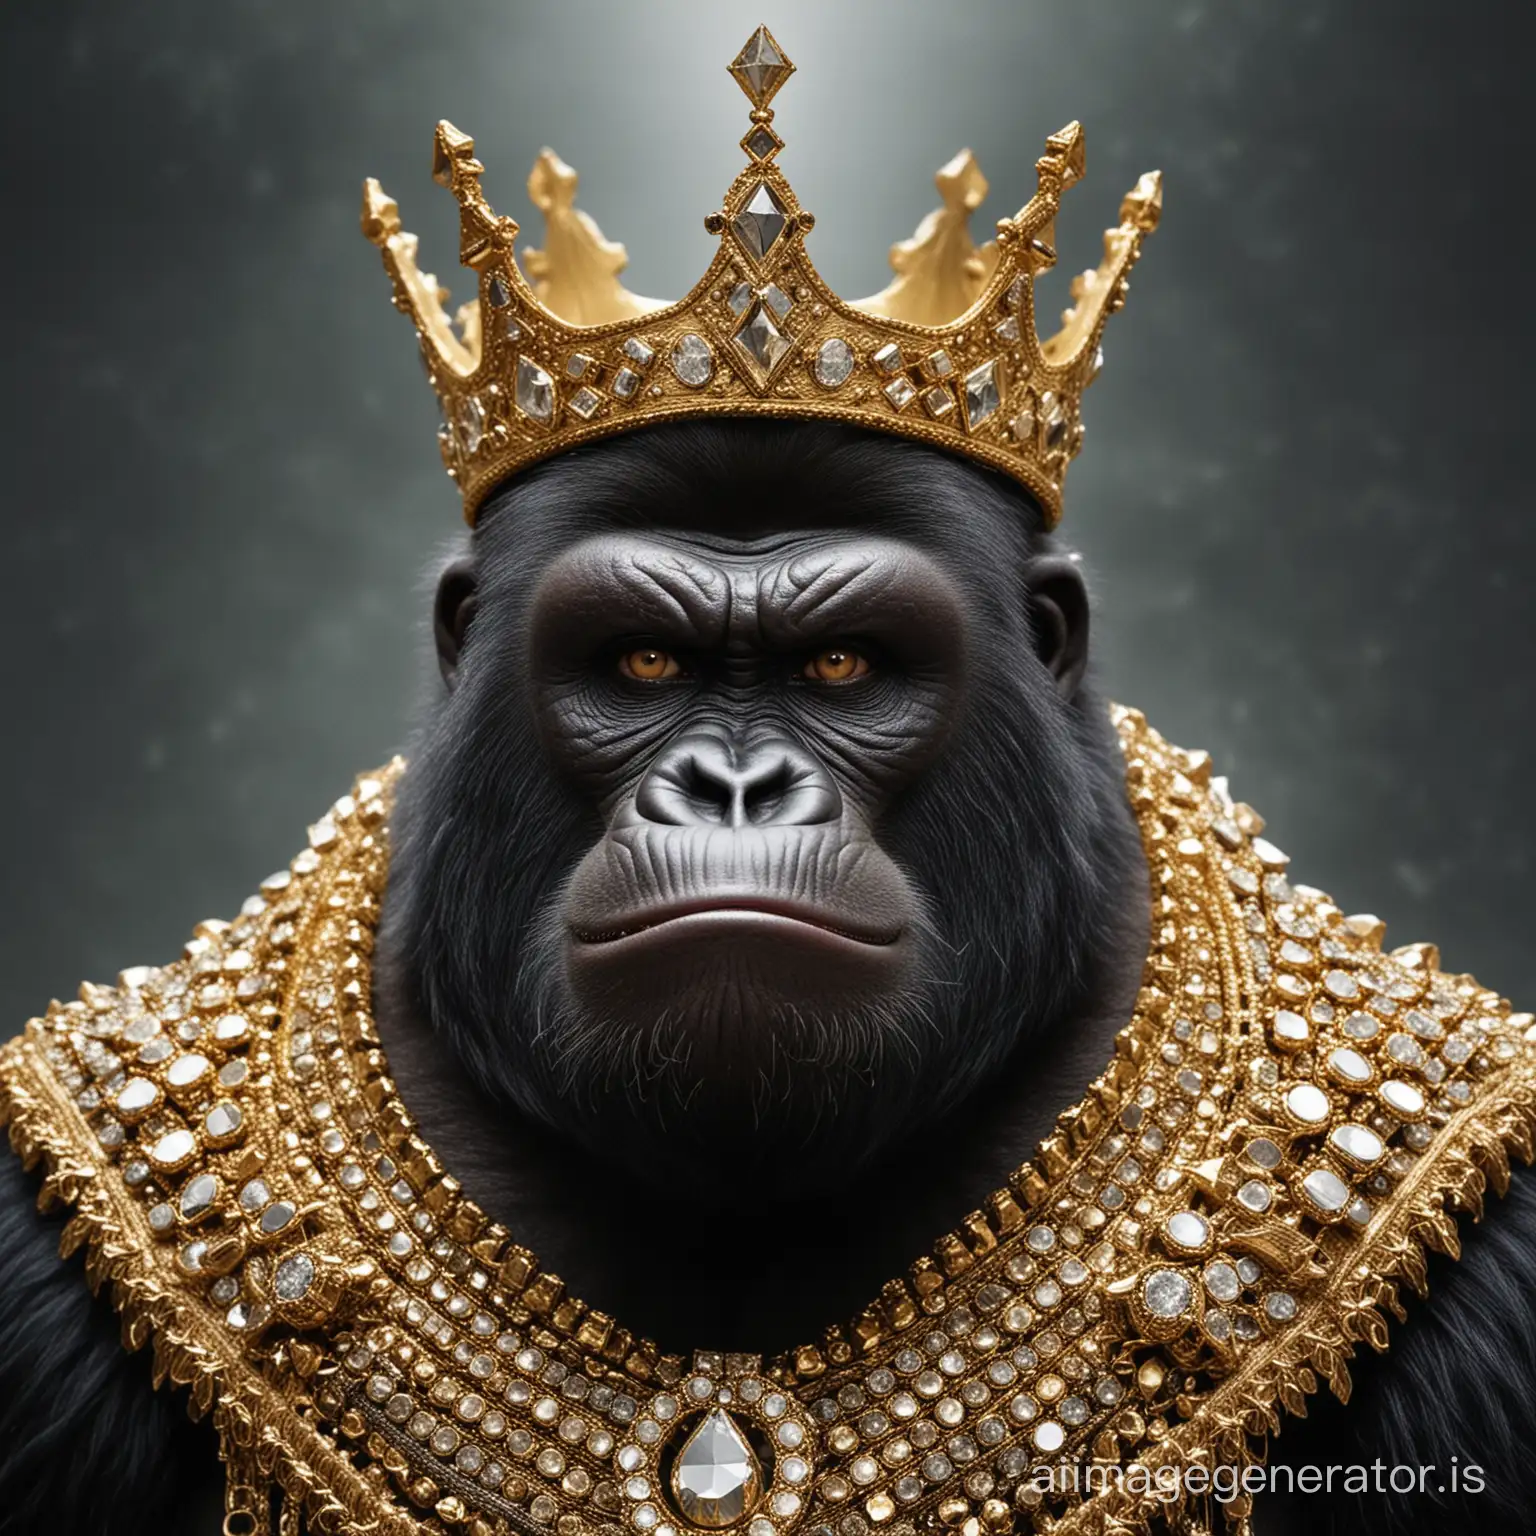 Regal-Gorilla-King-on-a-Golden-Throne-with-Diamond-Eyepatch-and-Majestic-Mountain-Range